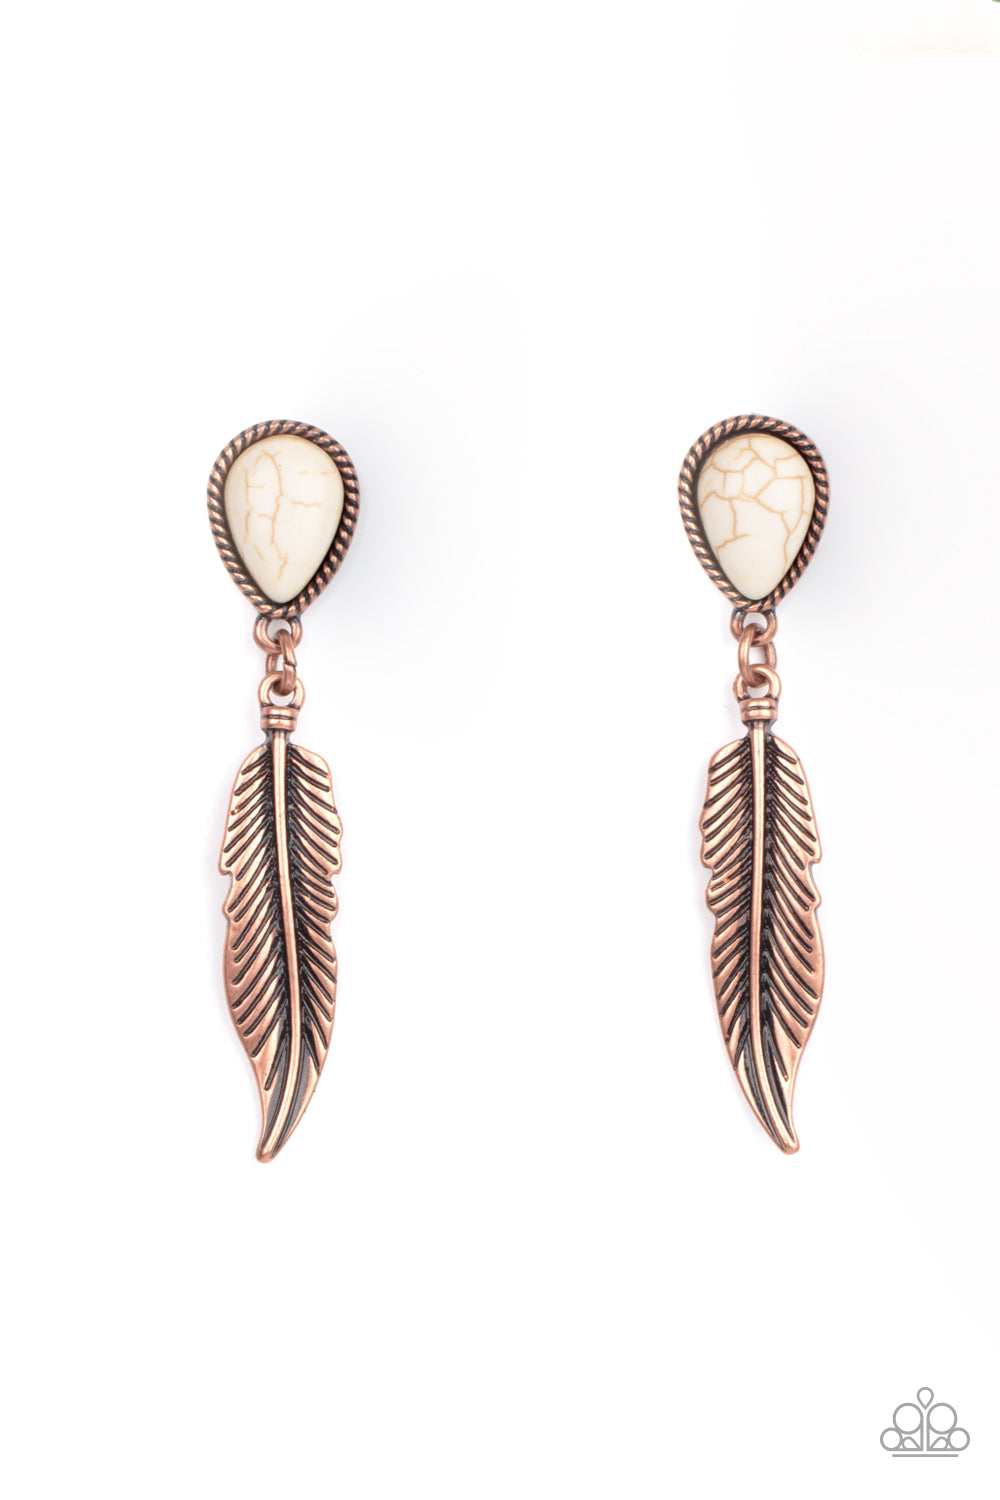 A lifelike copper feather charm swings from the bottom of a white stone teardrop, coalescing into a tranquil lure. Earring attaches to a standard post fitting.